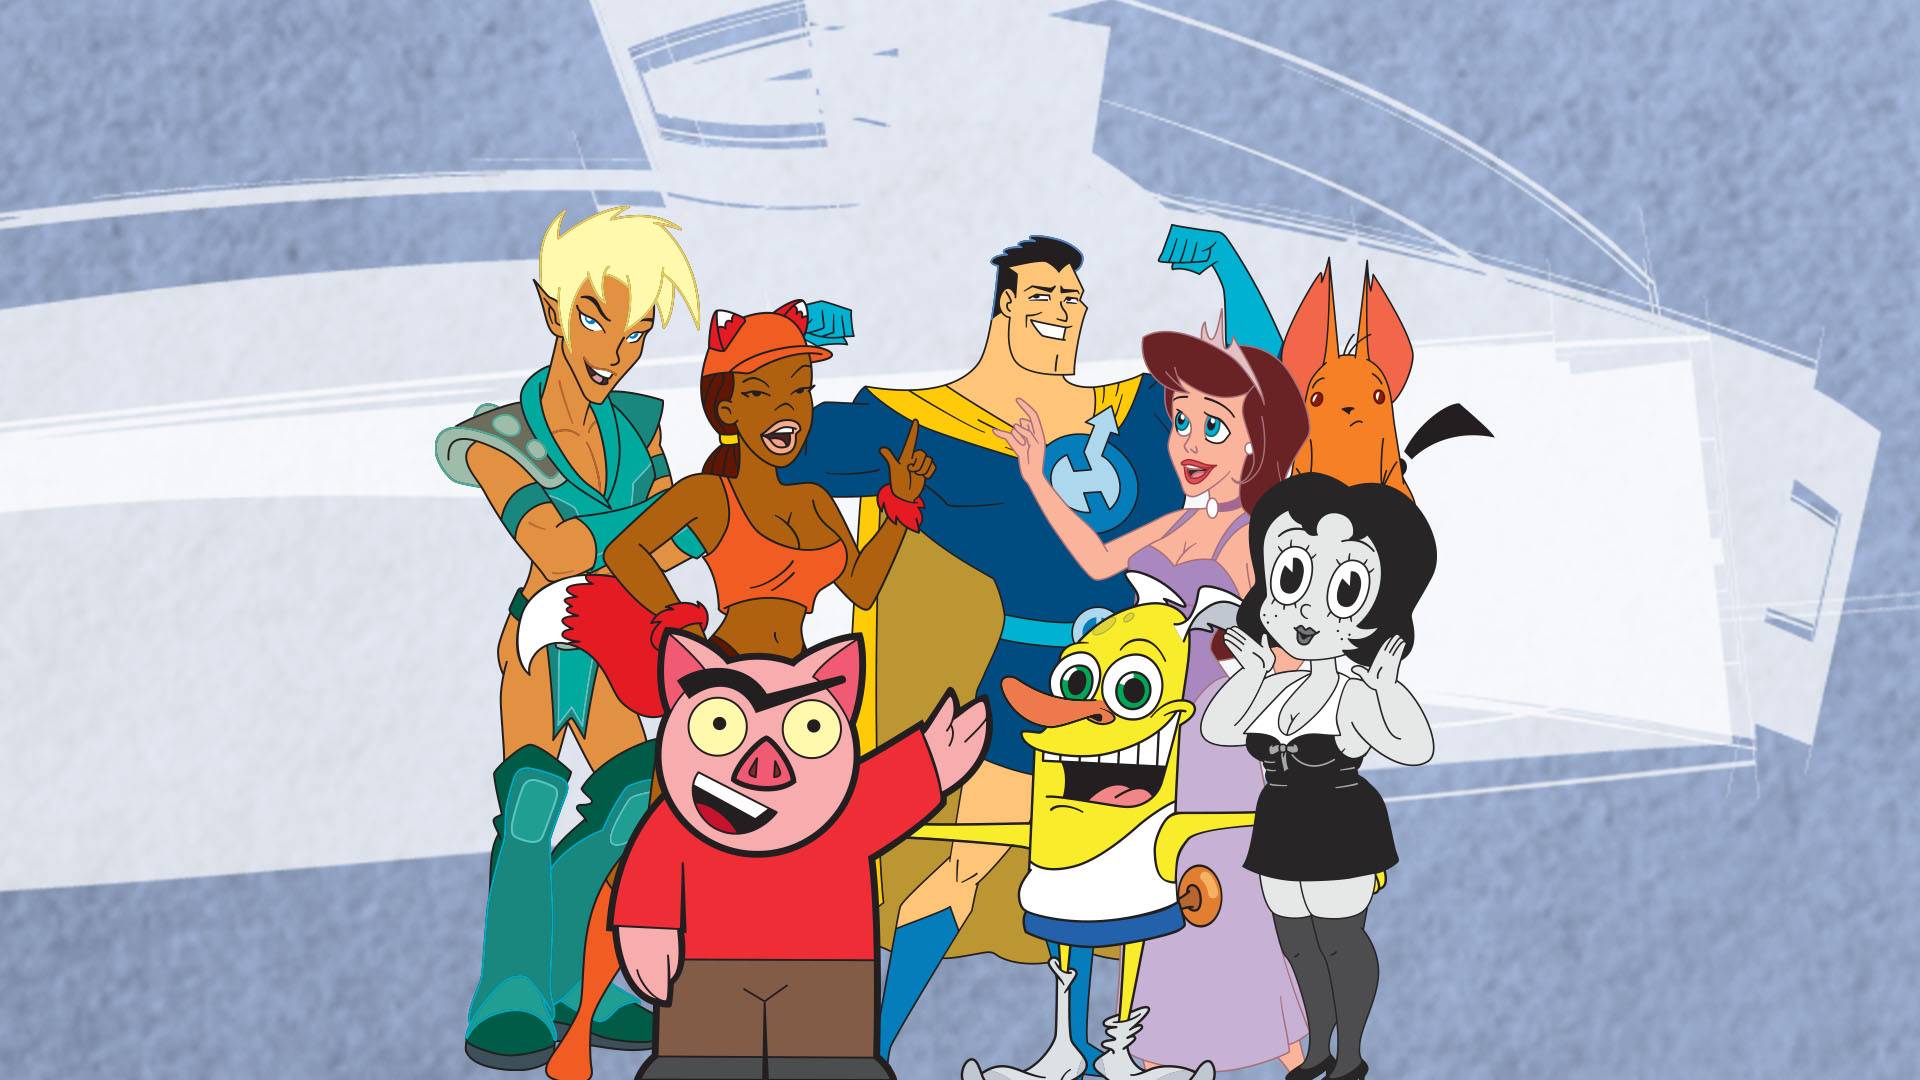 Promotional image for Drawn Together